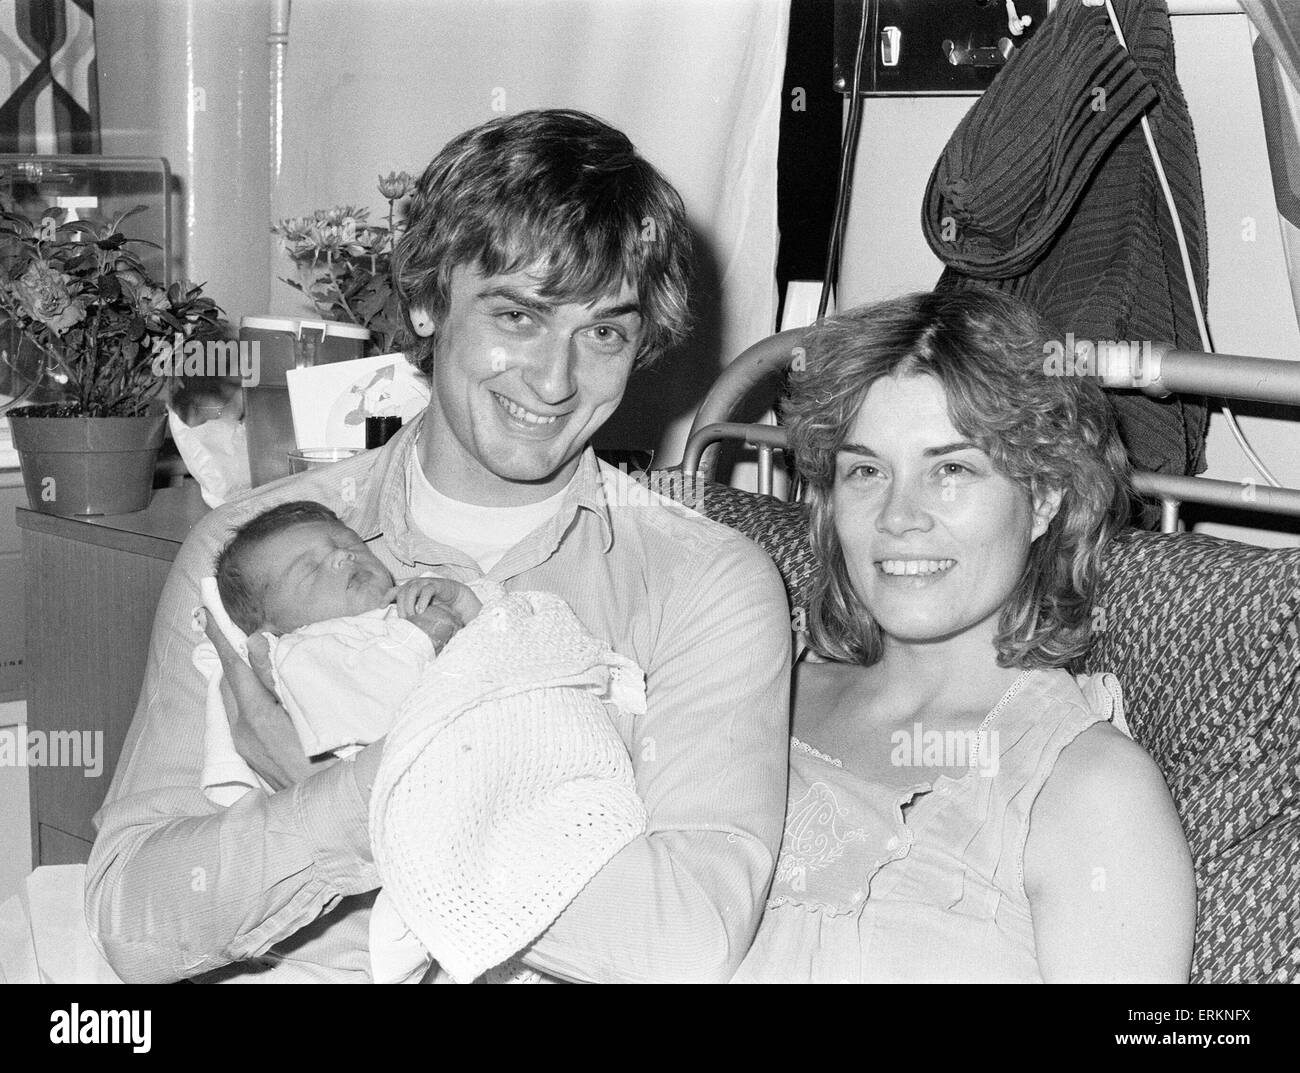 Mike Oldfield, musician and composer, pictured with newborn baby daughter Molly and partner Sally Cooper, 3rd December 1979. Stock Photo